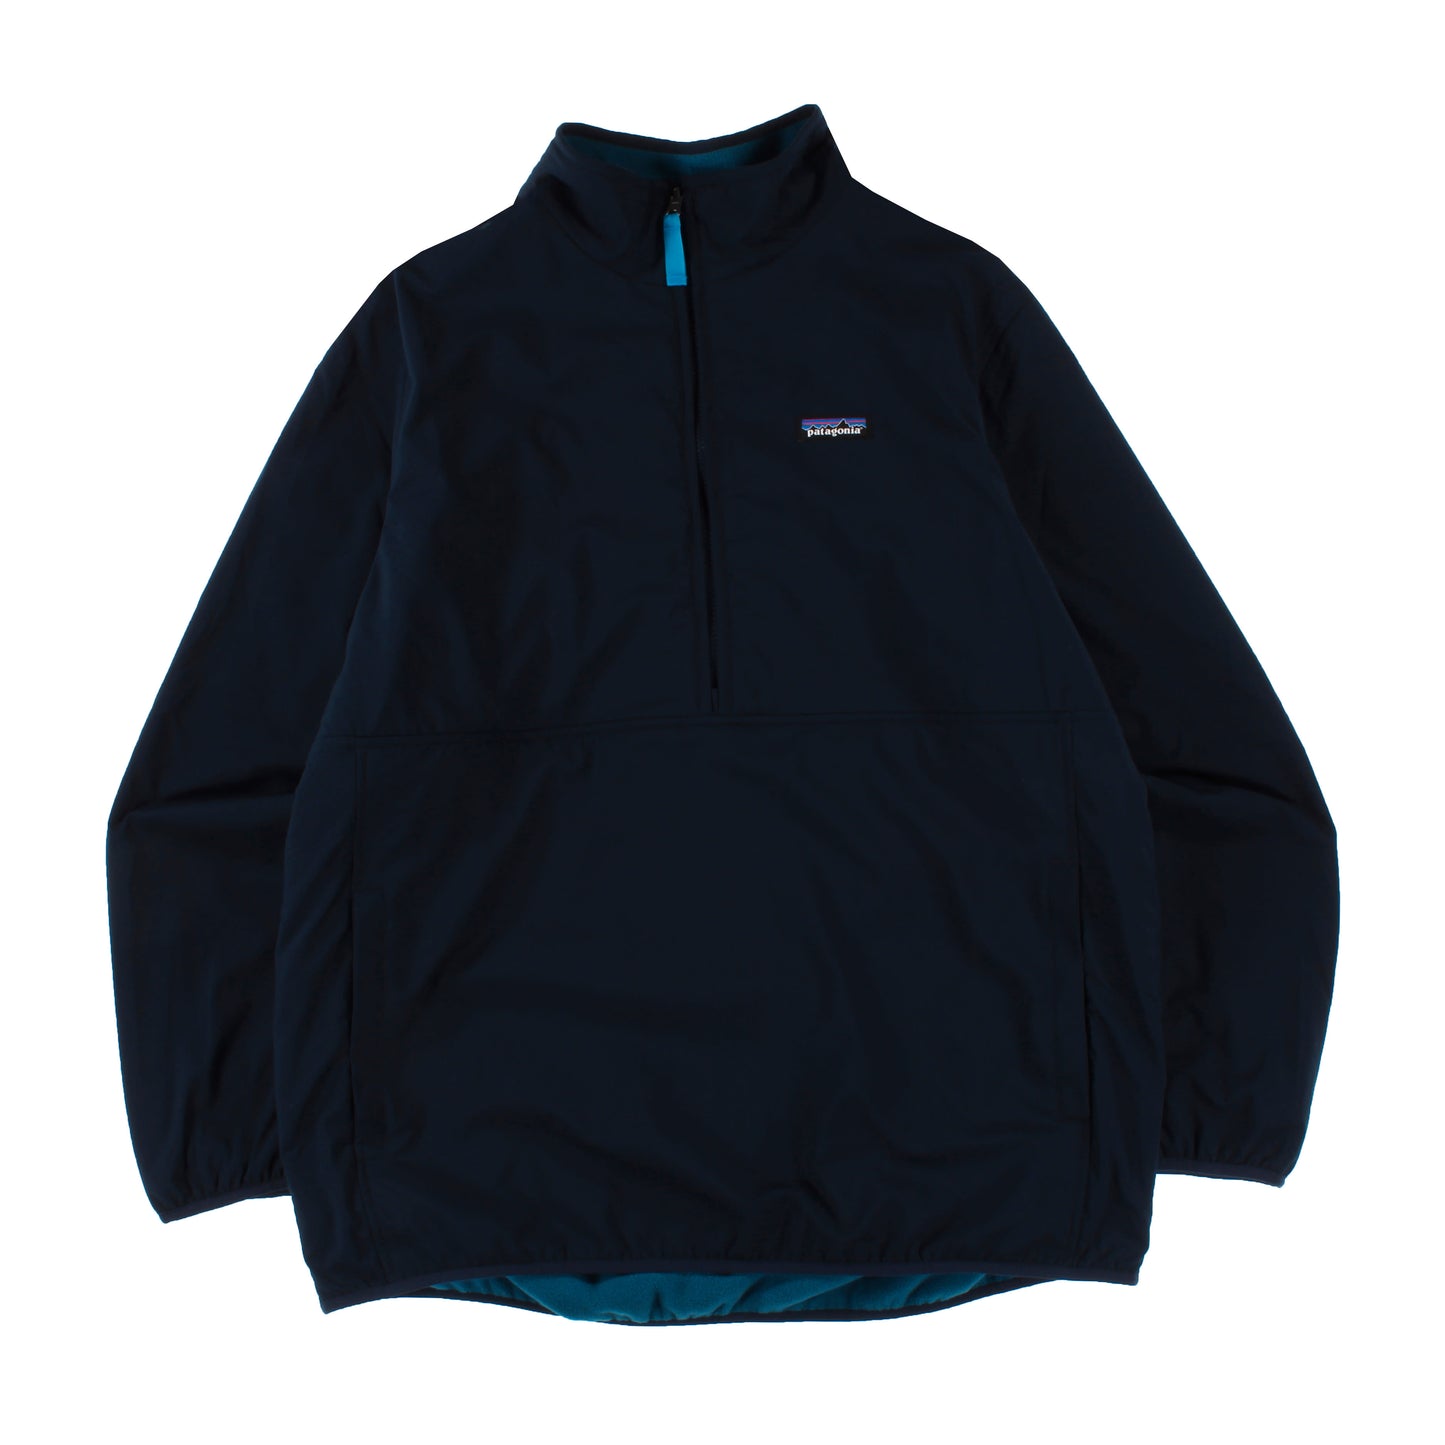 M's Reversible Snap-T® Glissade Pullover